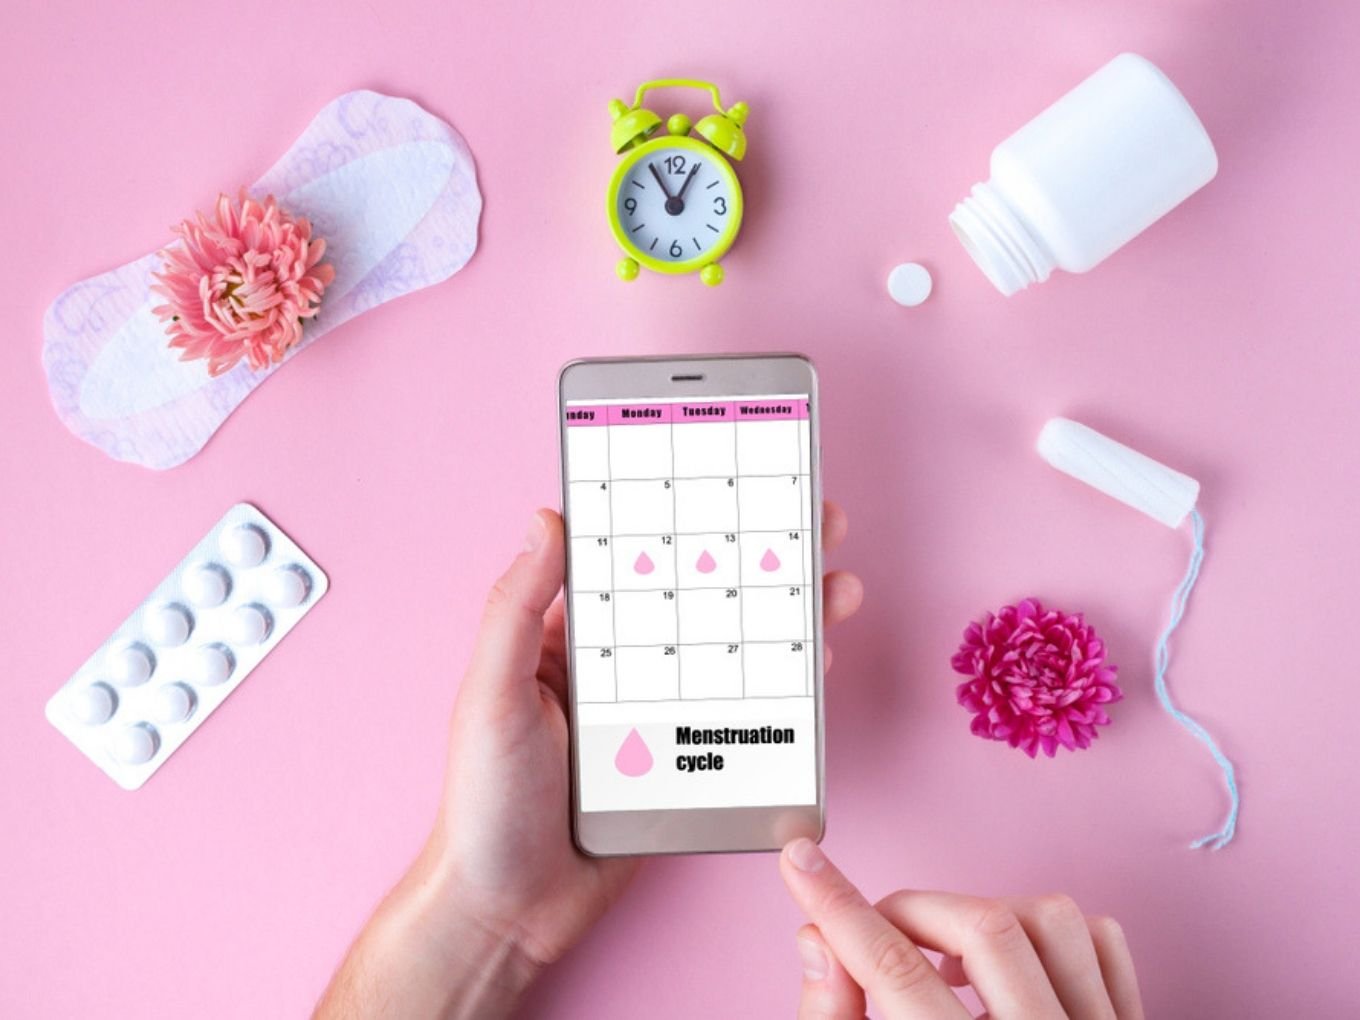 Maya, Period Tracking App Might Be Sharing Your Data With Facebook